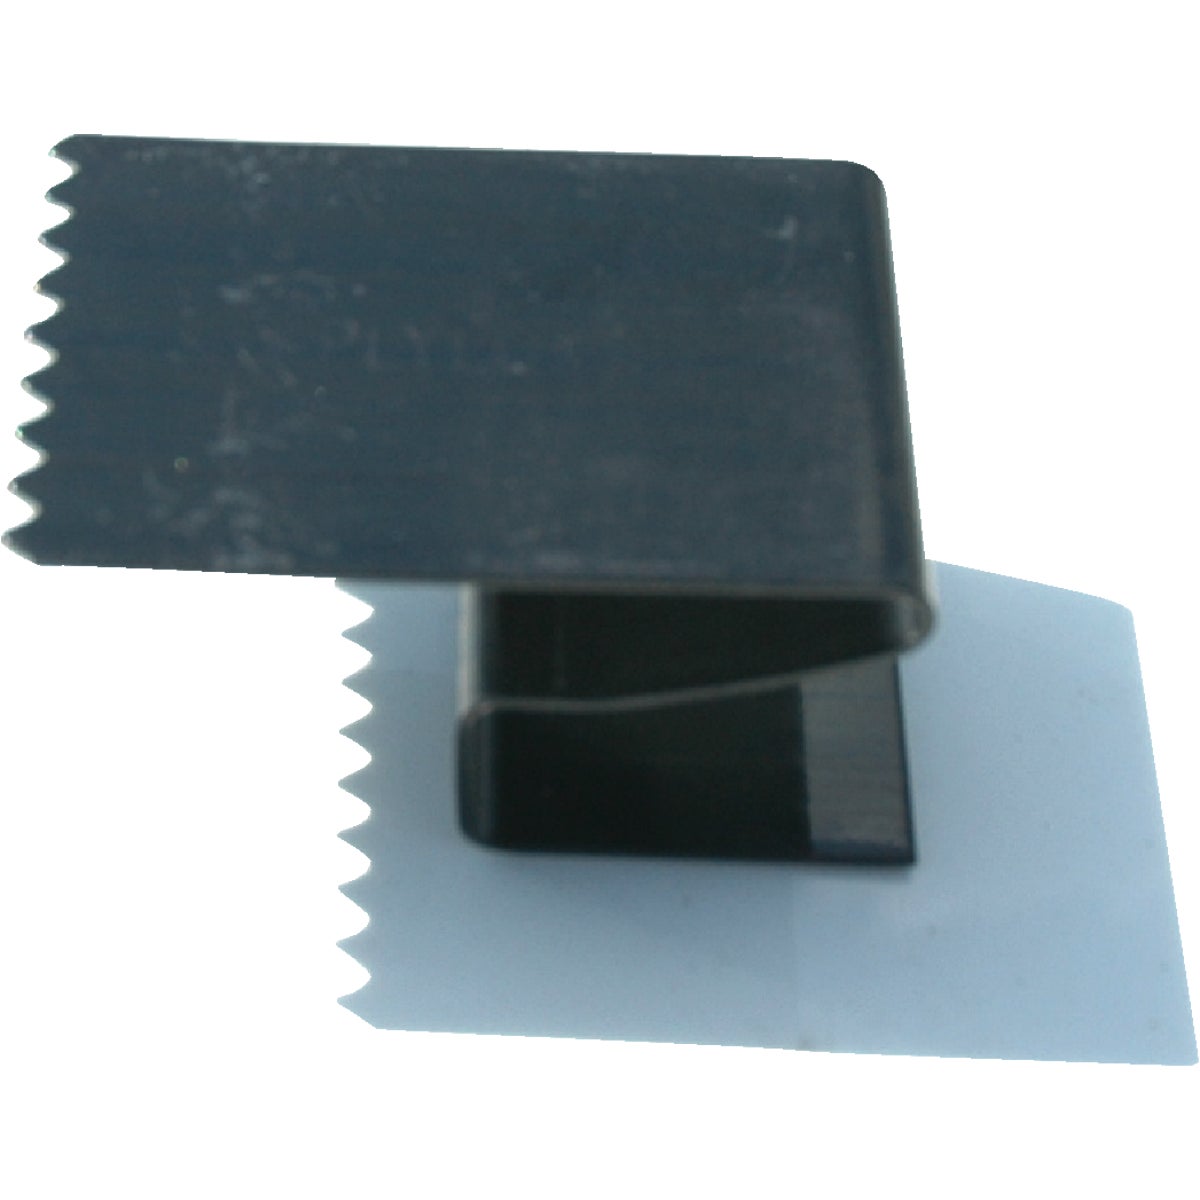 Item 763851, For boarding-up windows, without drilling, screws or nails to protect your 